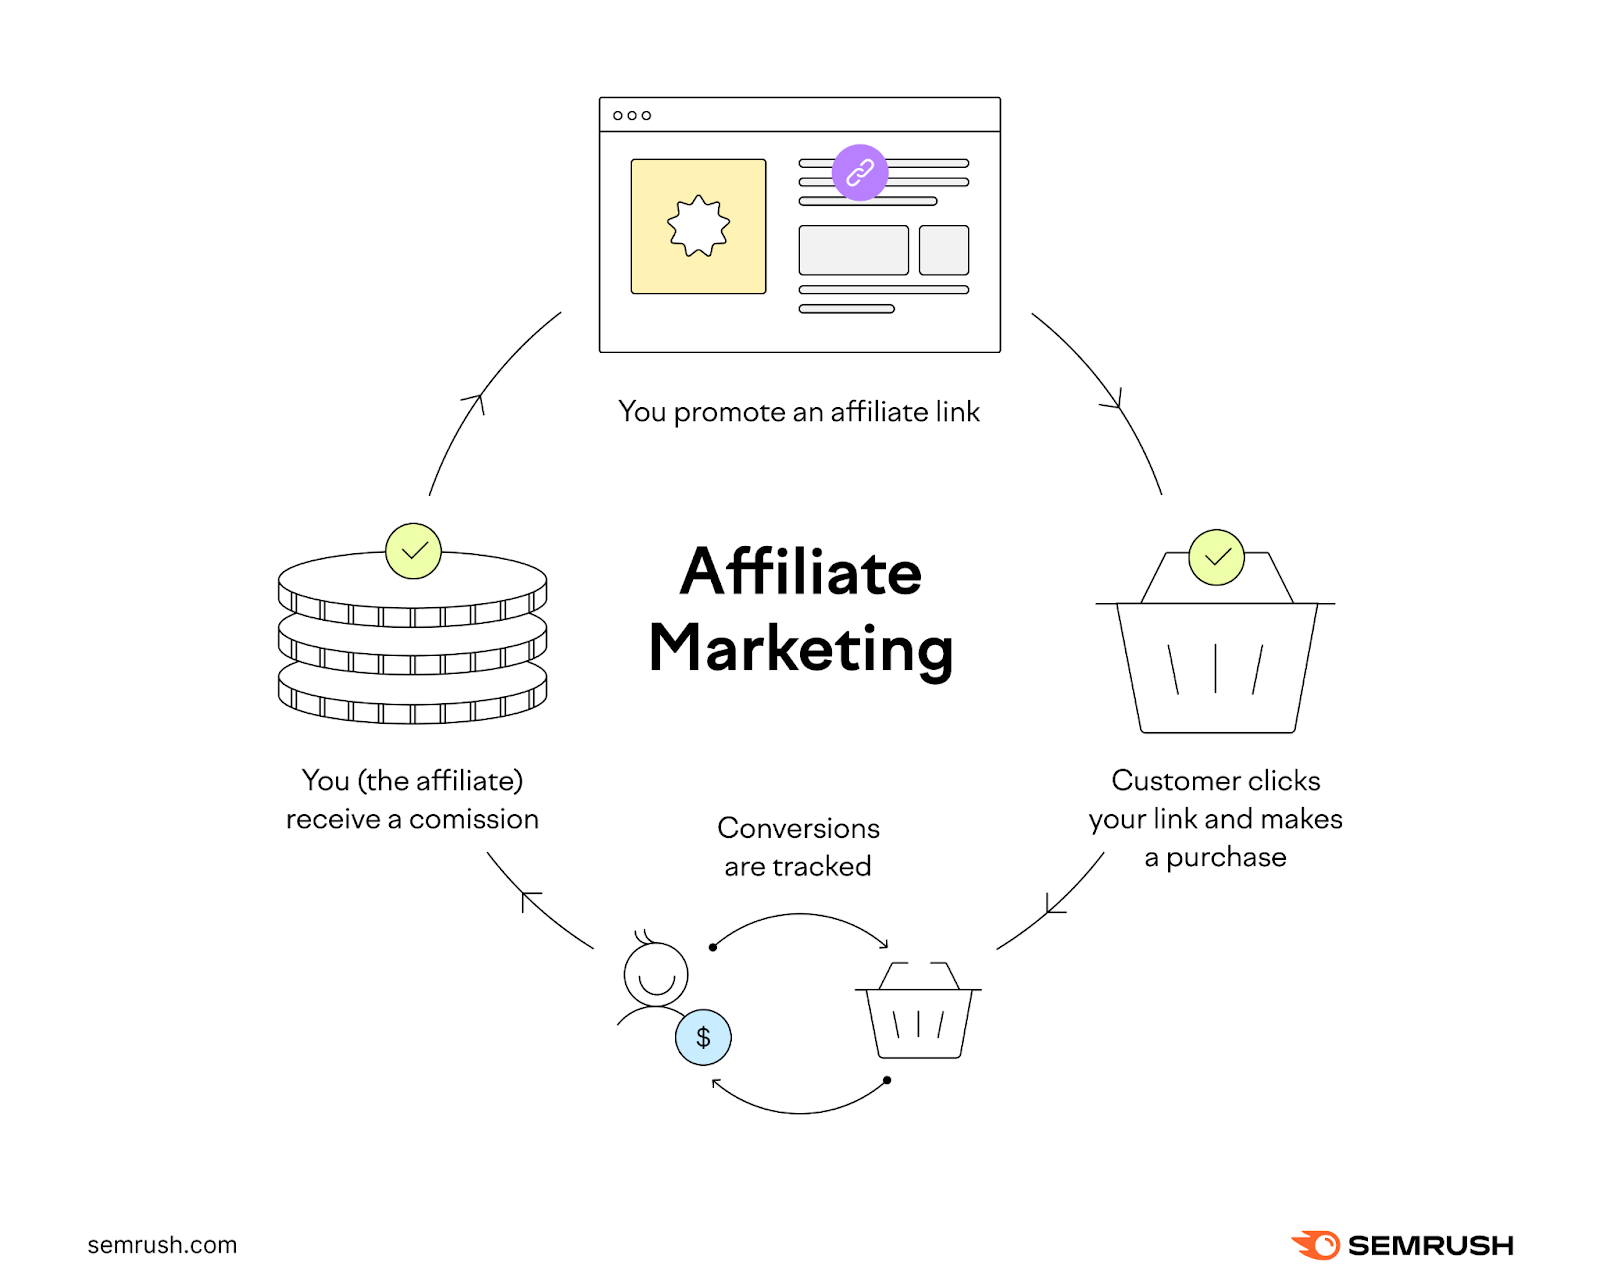 An illustration showing how affiliate marketing works